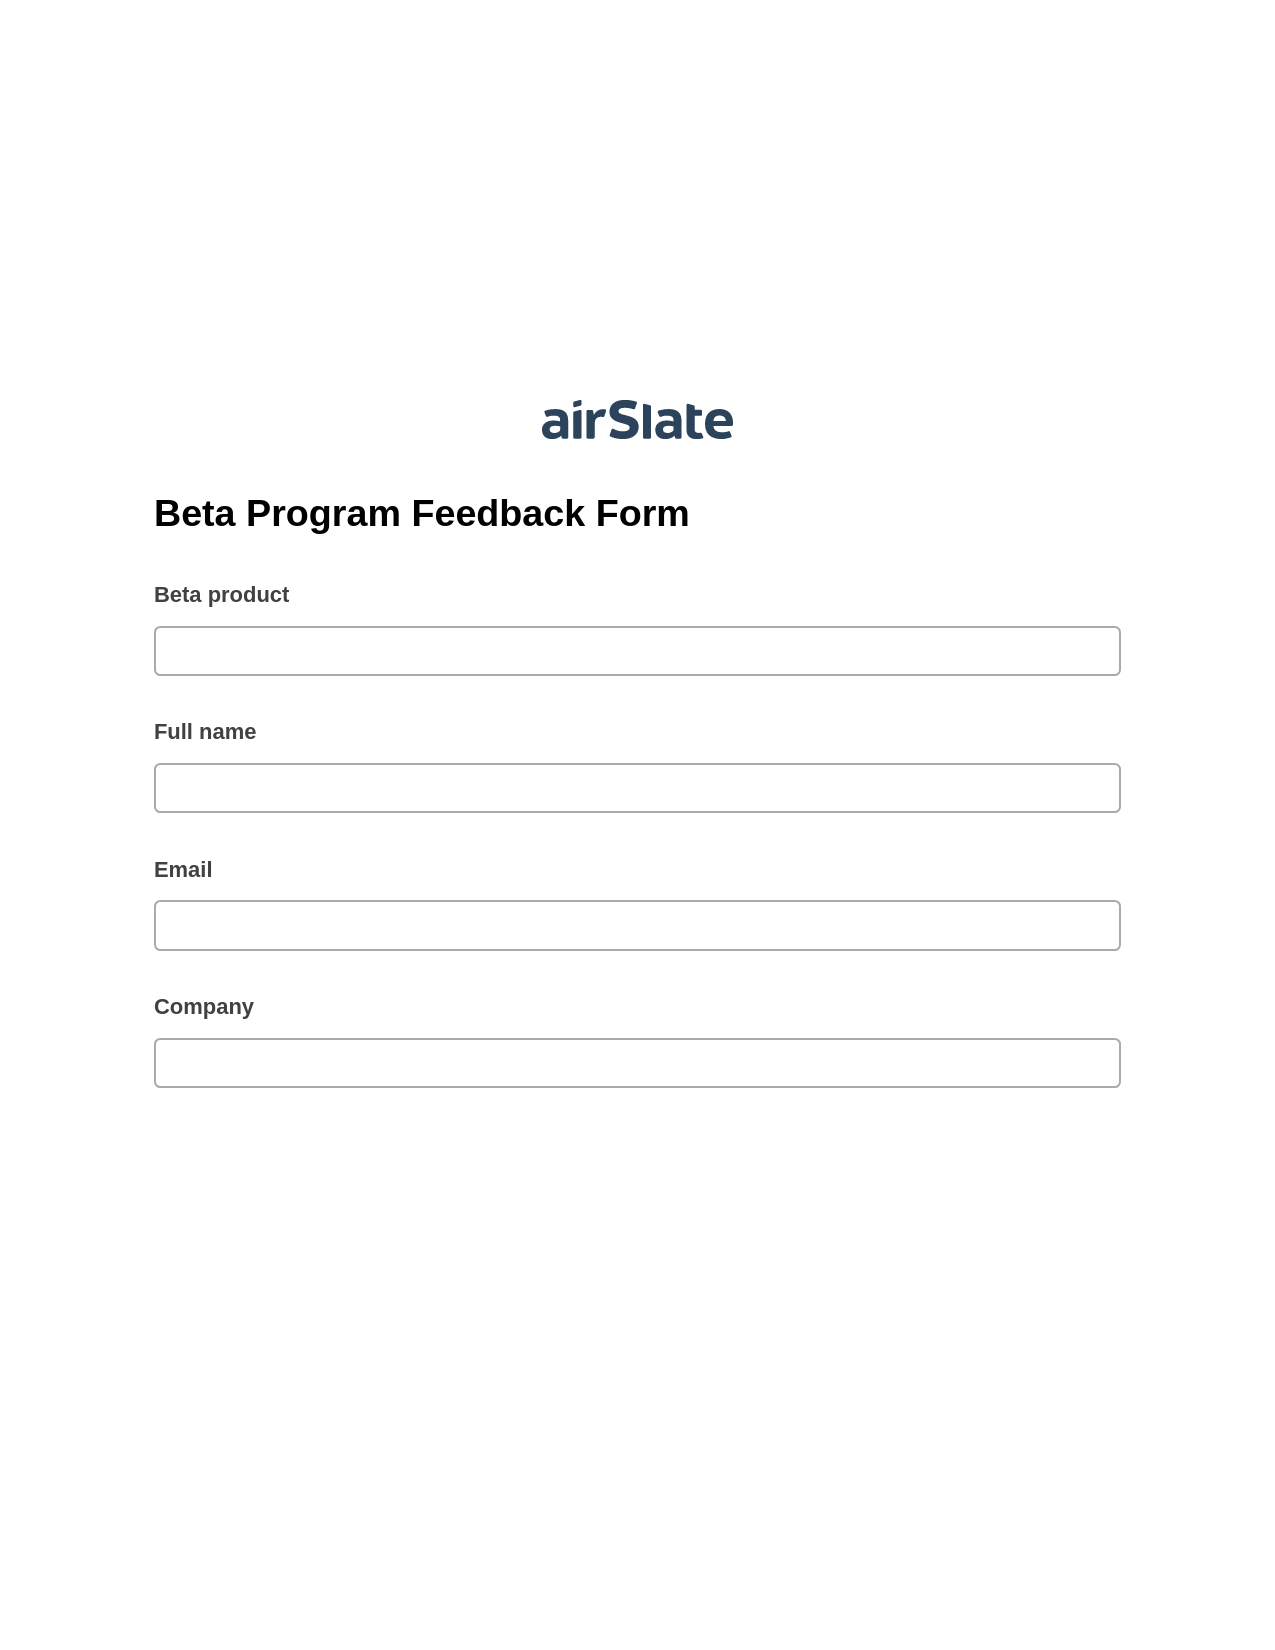 Multirole Beta Program Feedback Form System Bot - Slack Two-Way Binding Bot, Remove Tags From Slate Bot, Export to NetSuite Record Bot